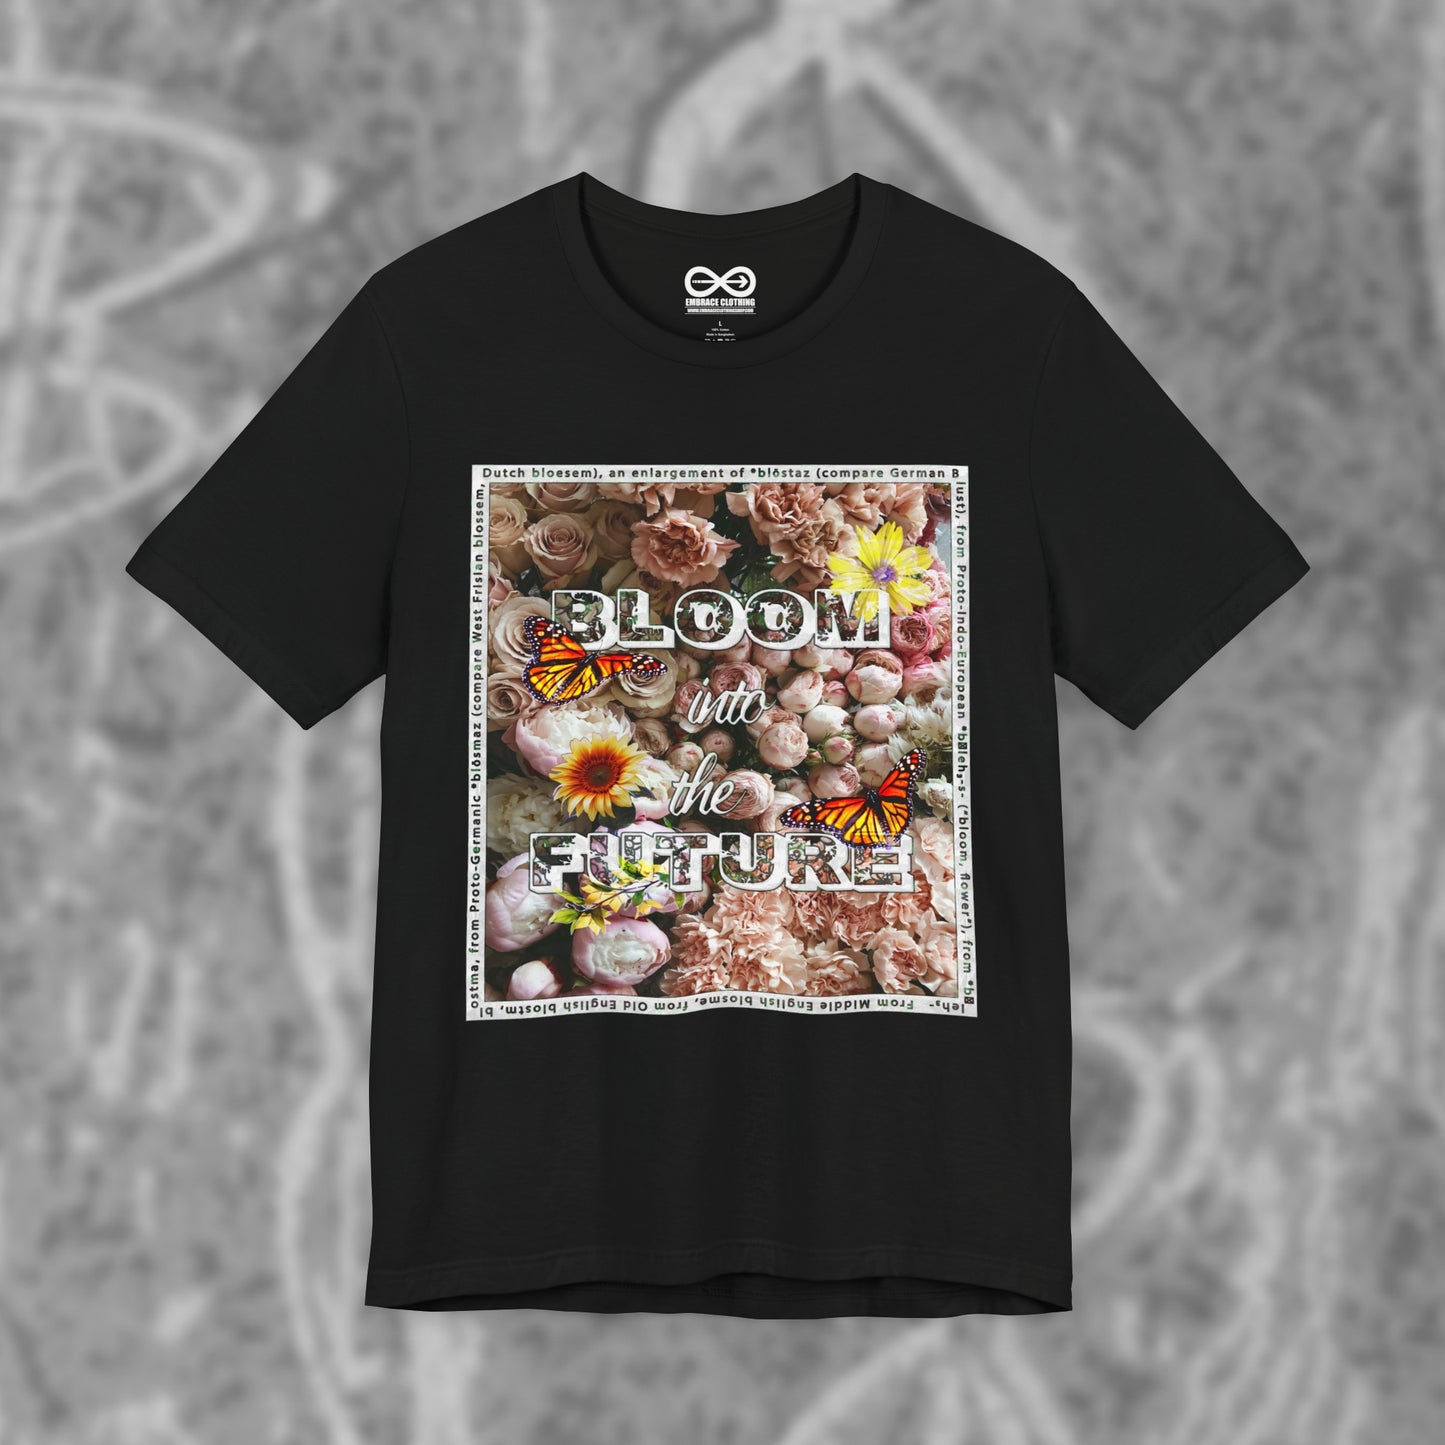 Embrace Clothing "POLLEN" Tee